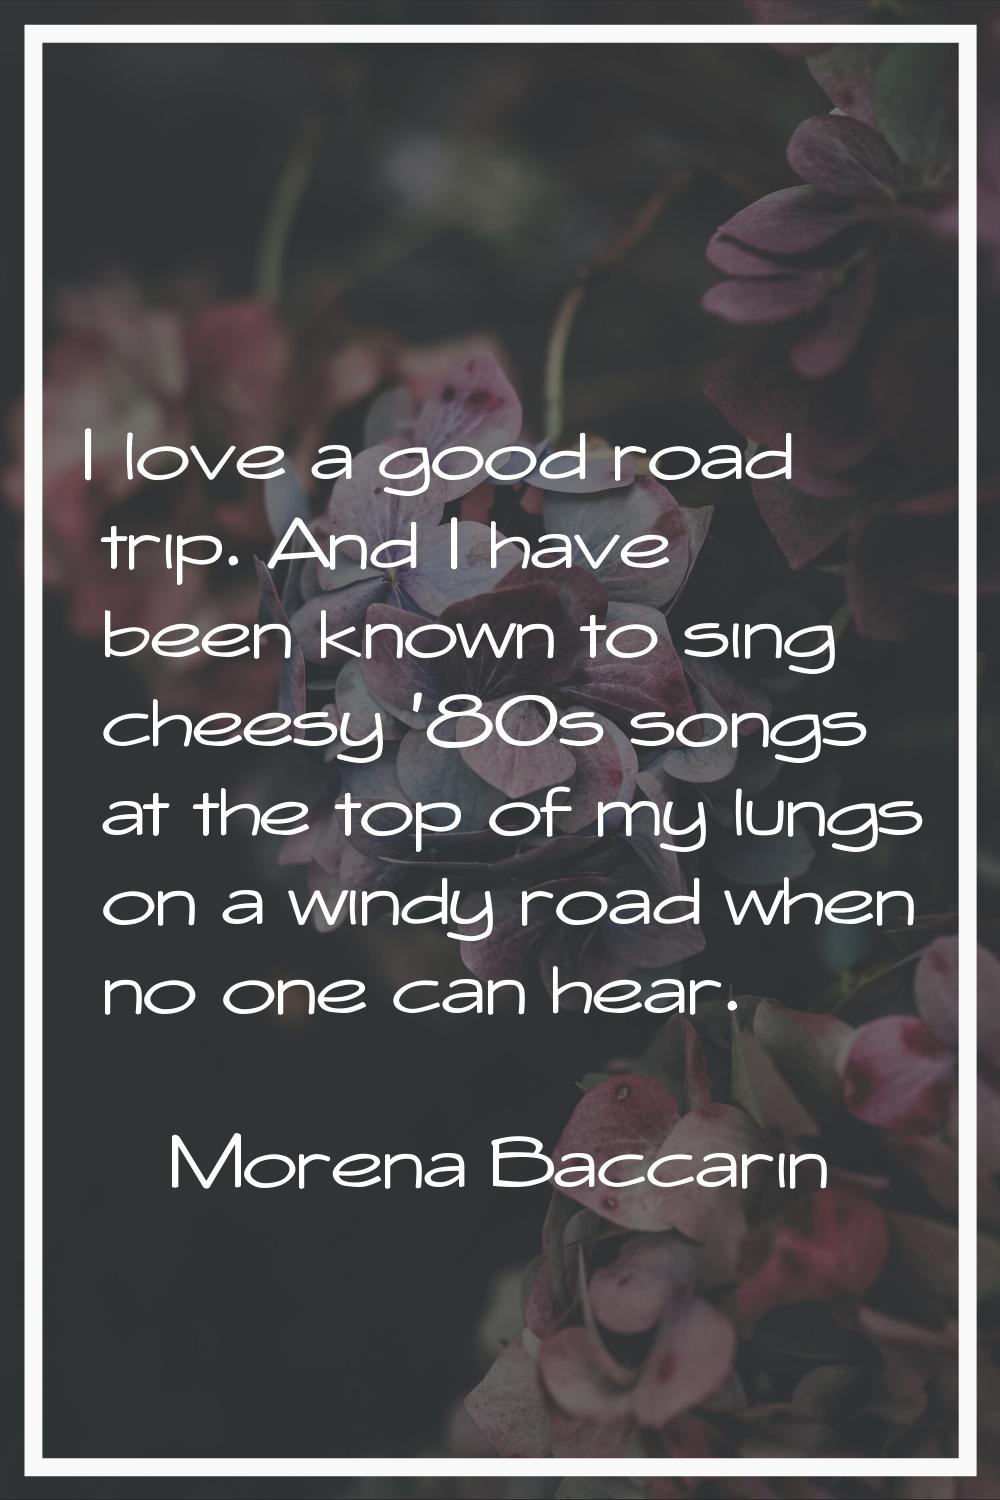 I love a good road trip. And I have been known to sing cheesy '80s songs at the top of my lungs on 